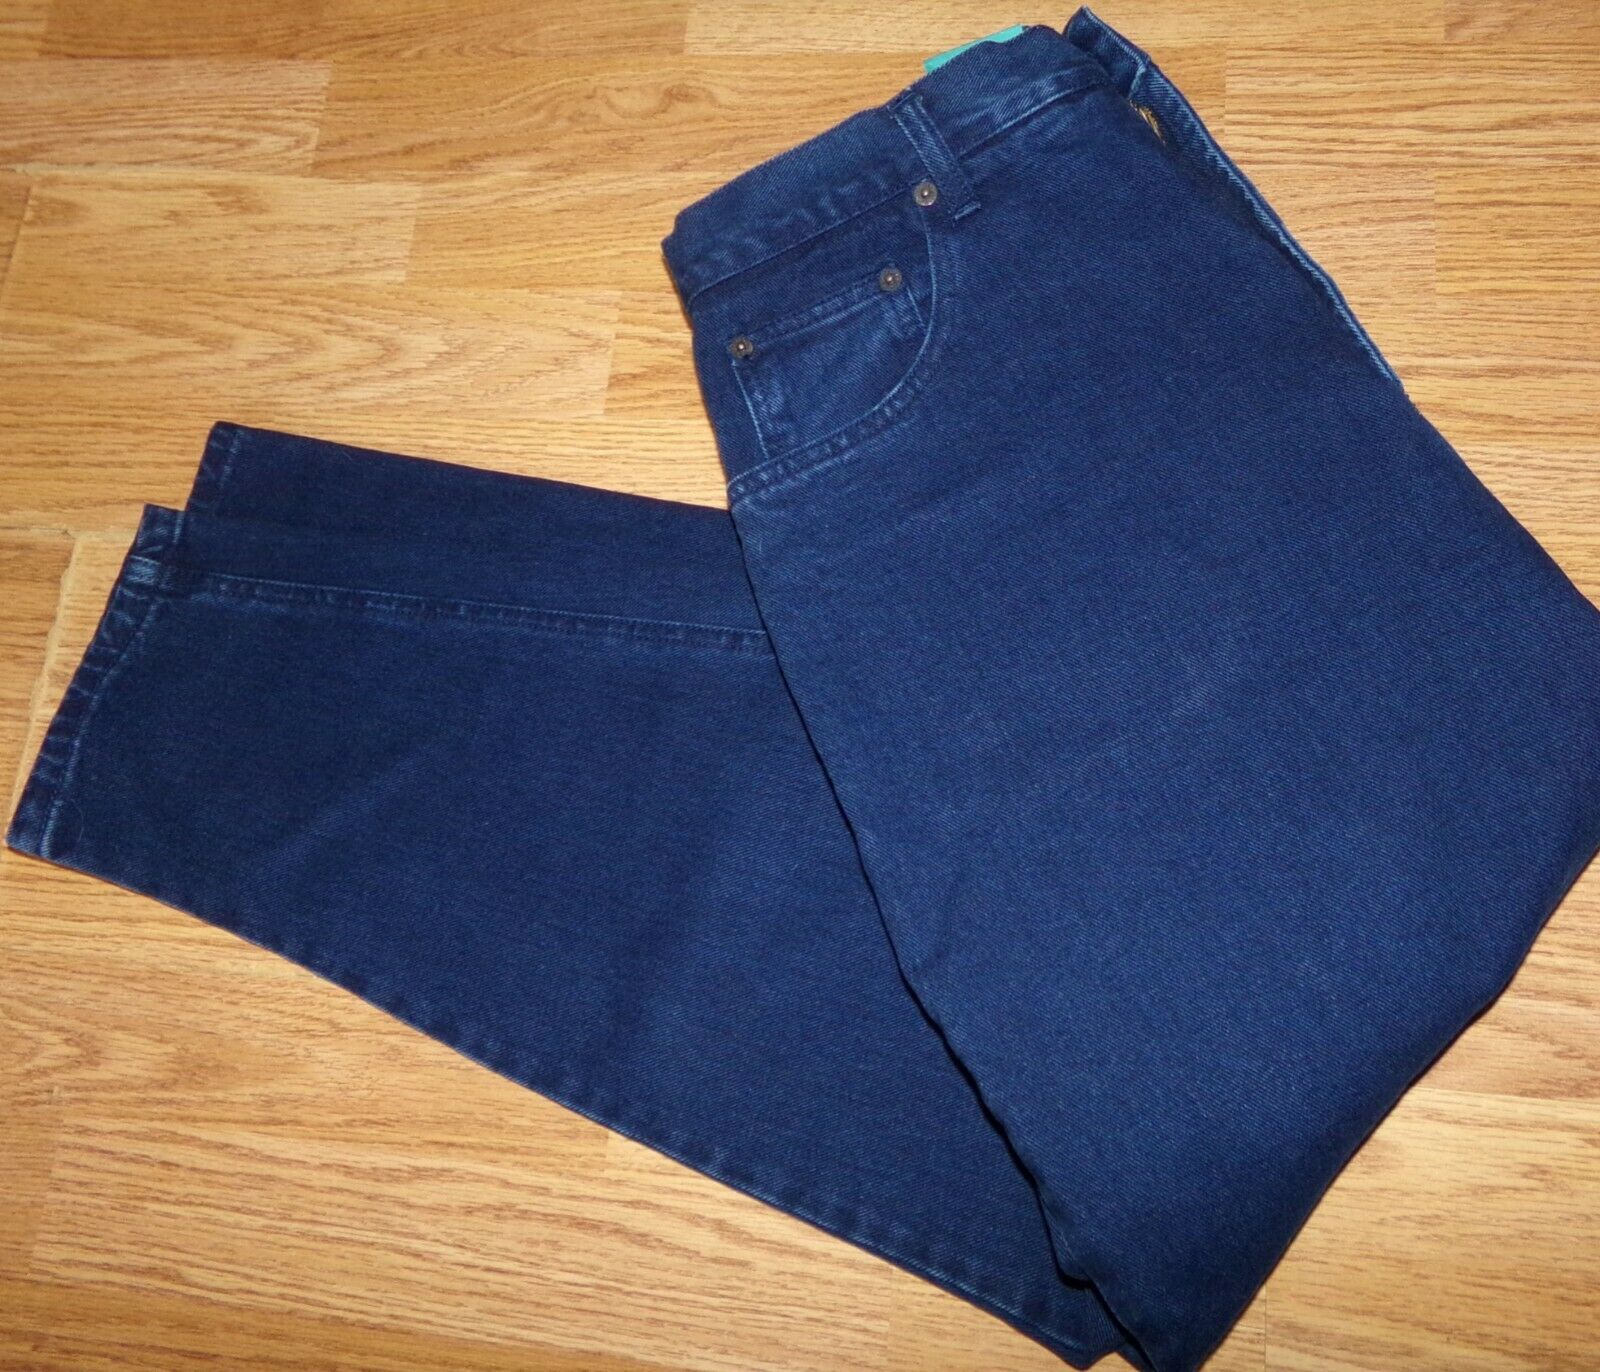 Nwt Merona Womens Size 16p Blue Jeans Relaxed Tapered Leg High Waist Vintage